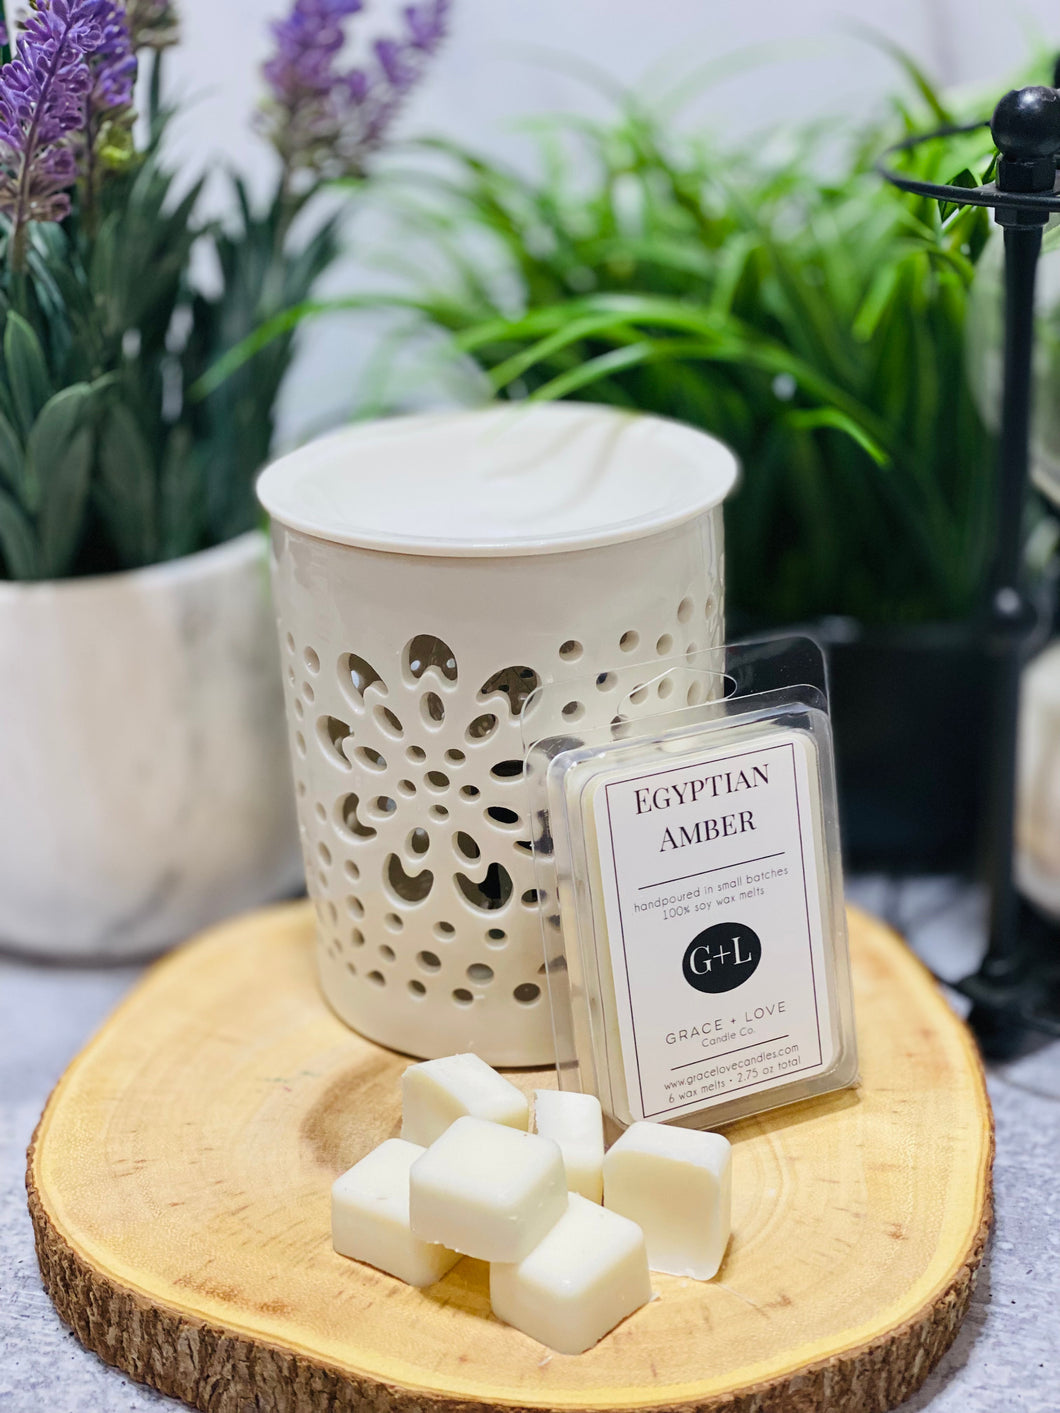 Egyptian Amber Wax Melts - Grace+Love Candle Co.